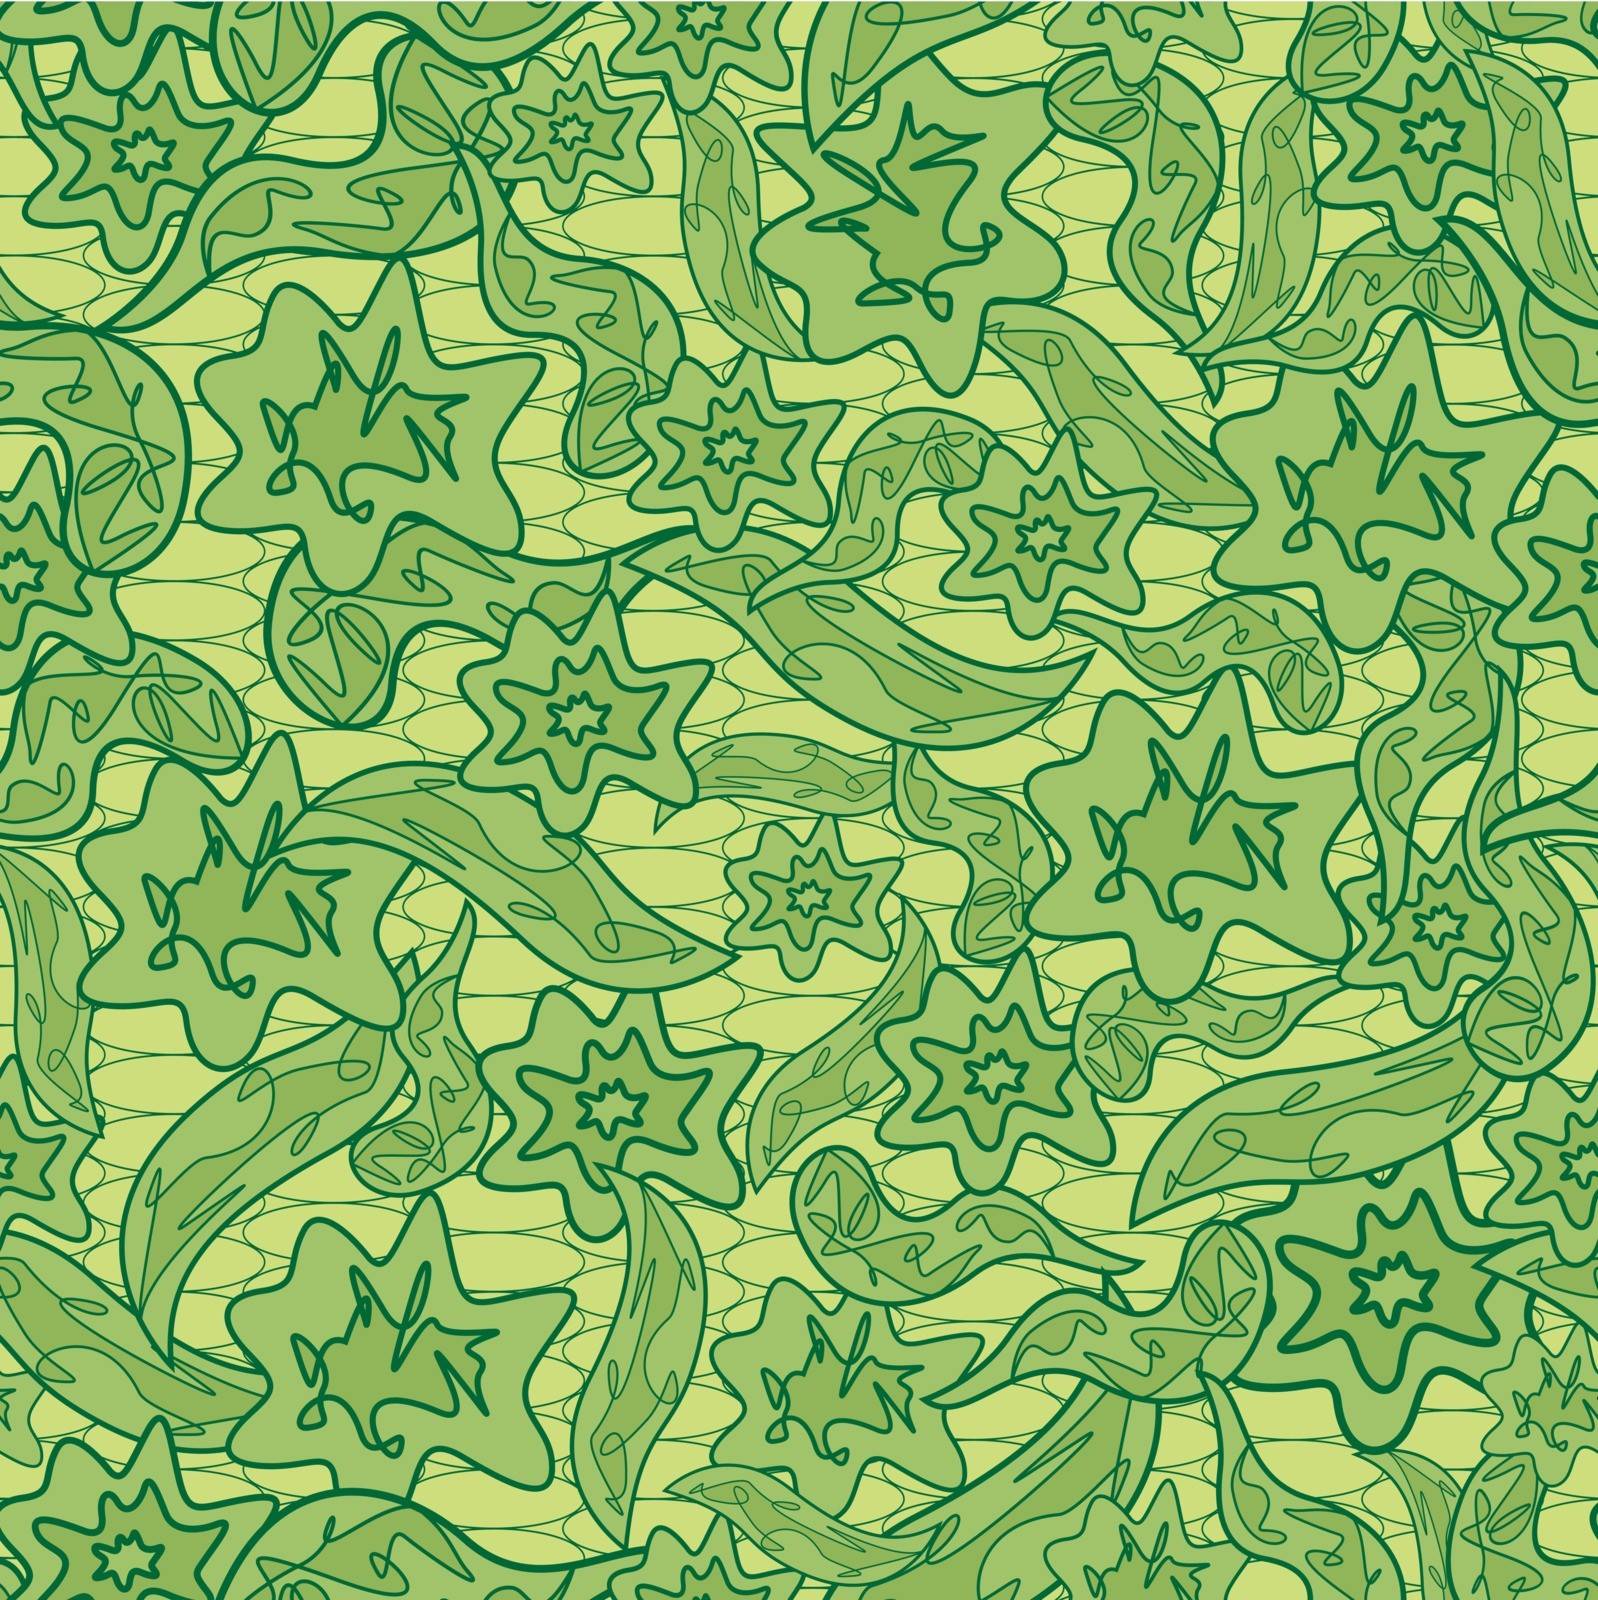 Abstract herbal camouflage green pattern. Hand drawing seamless vector illustration